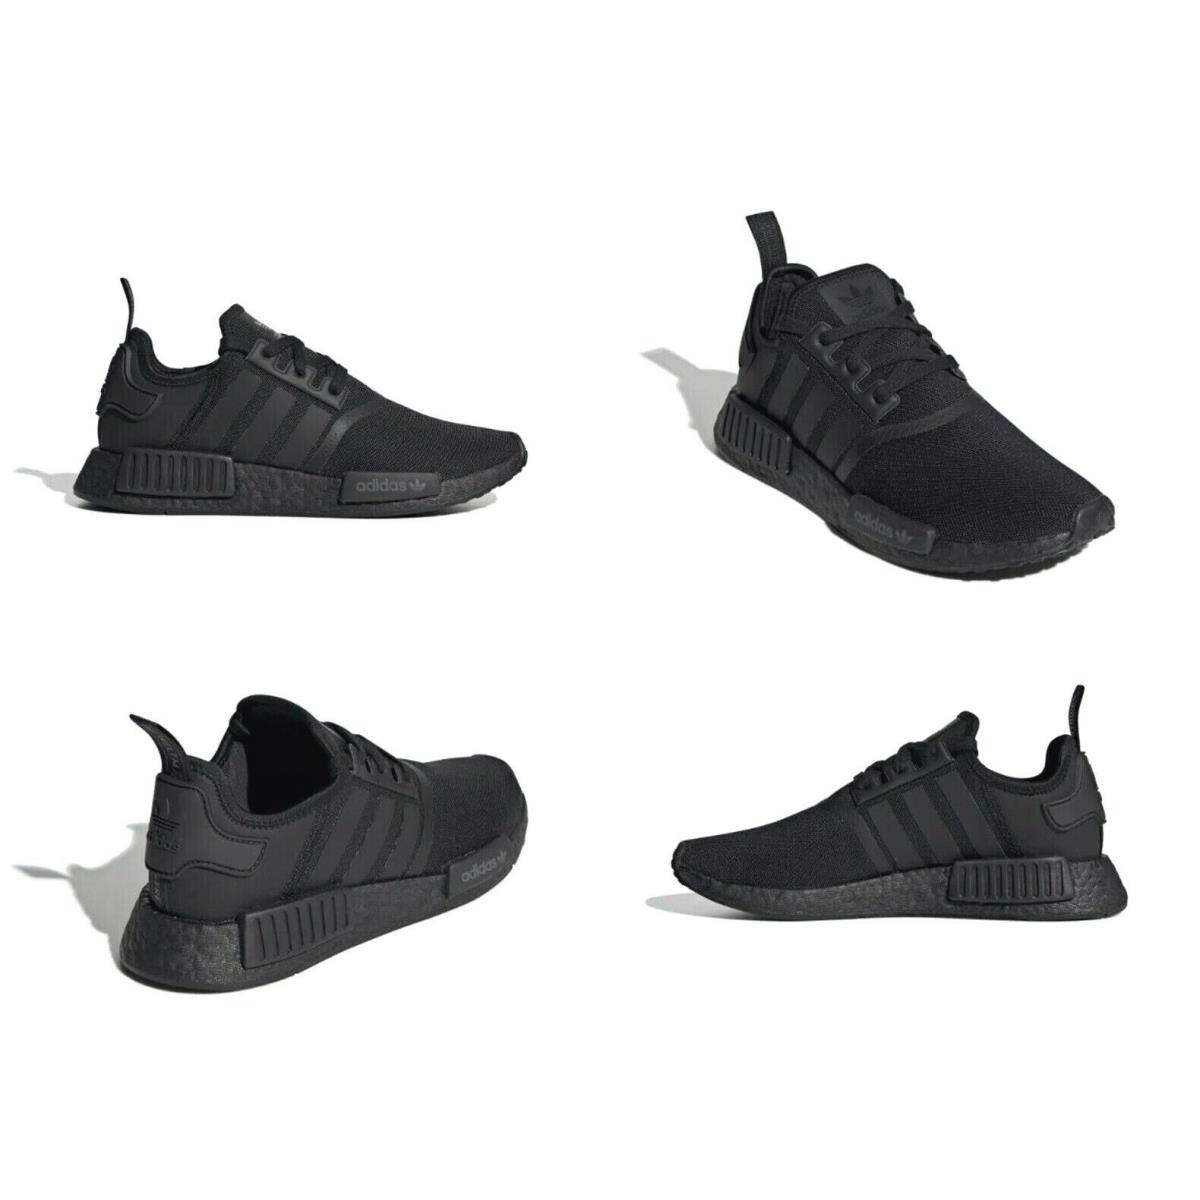 Adidas Nmd R1 Triple Black Boost Running Shoes Mens Size 7 US FV9015